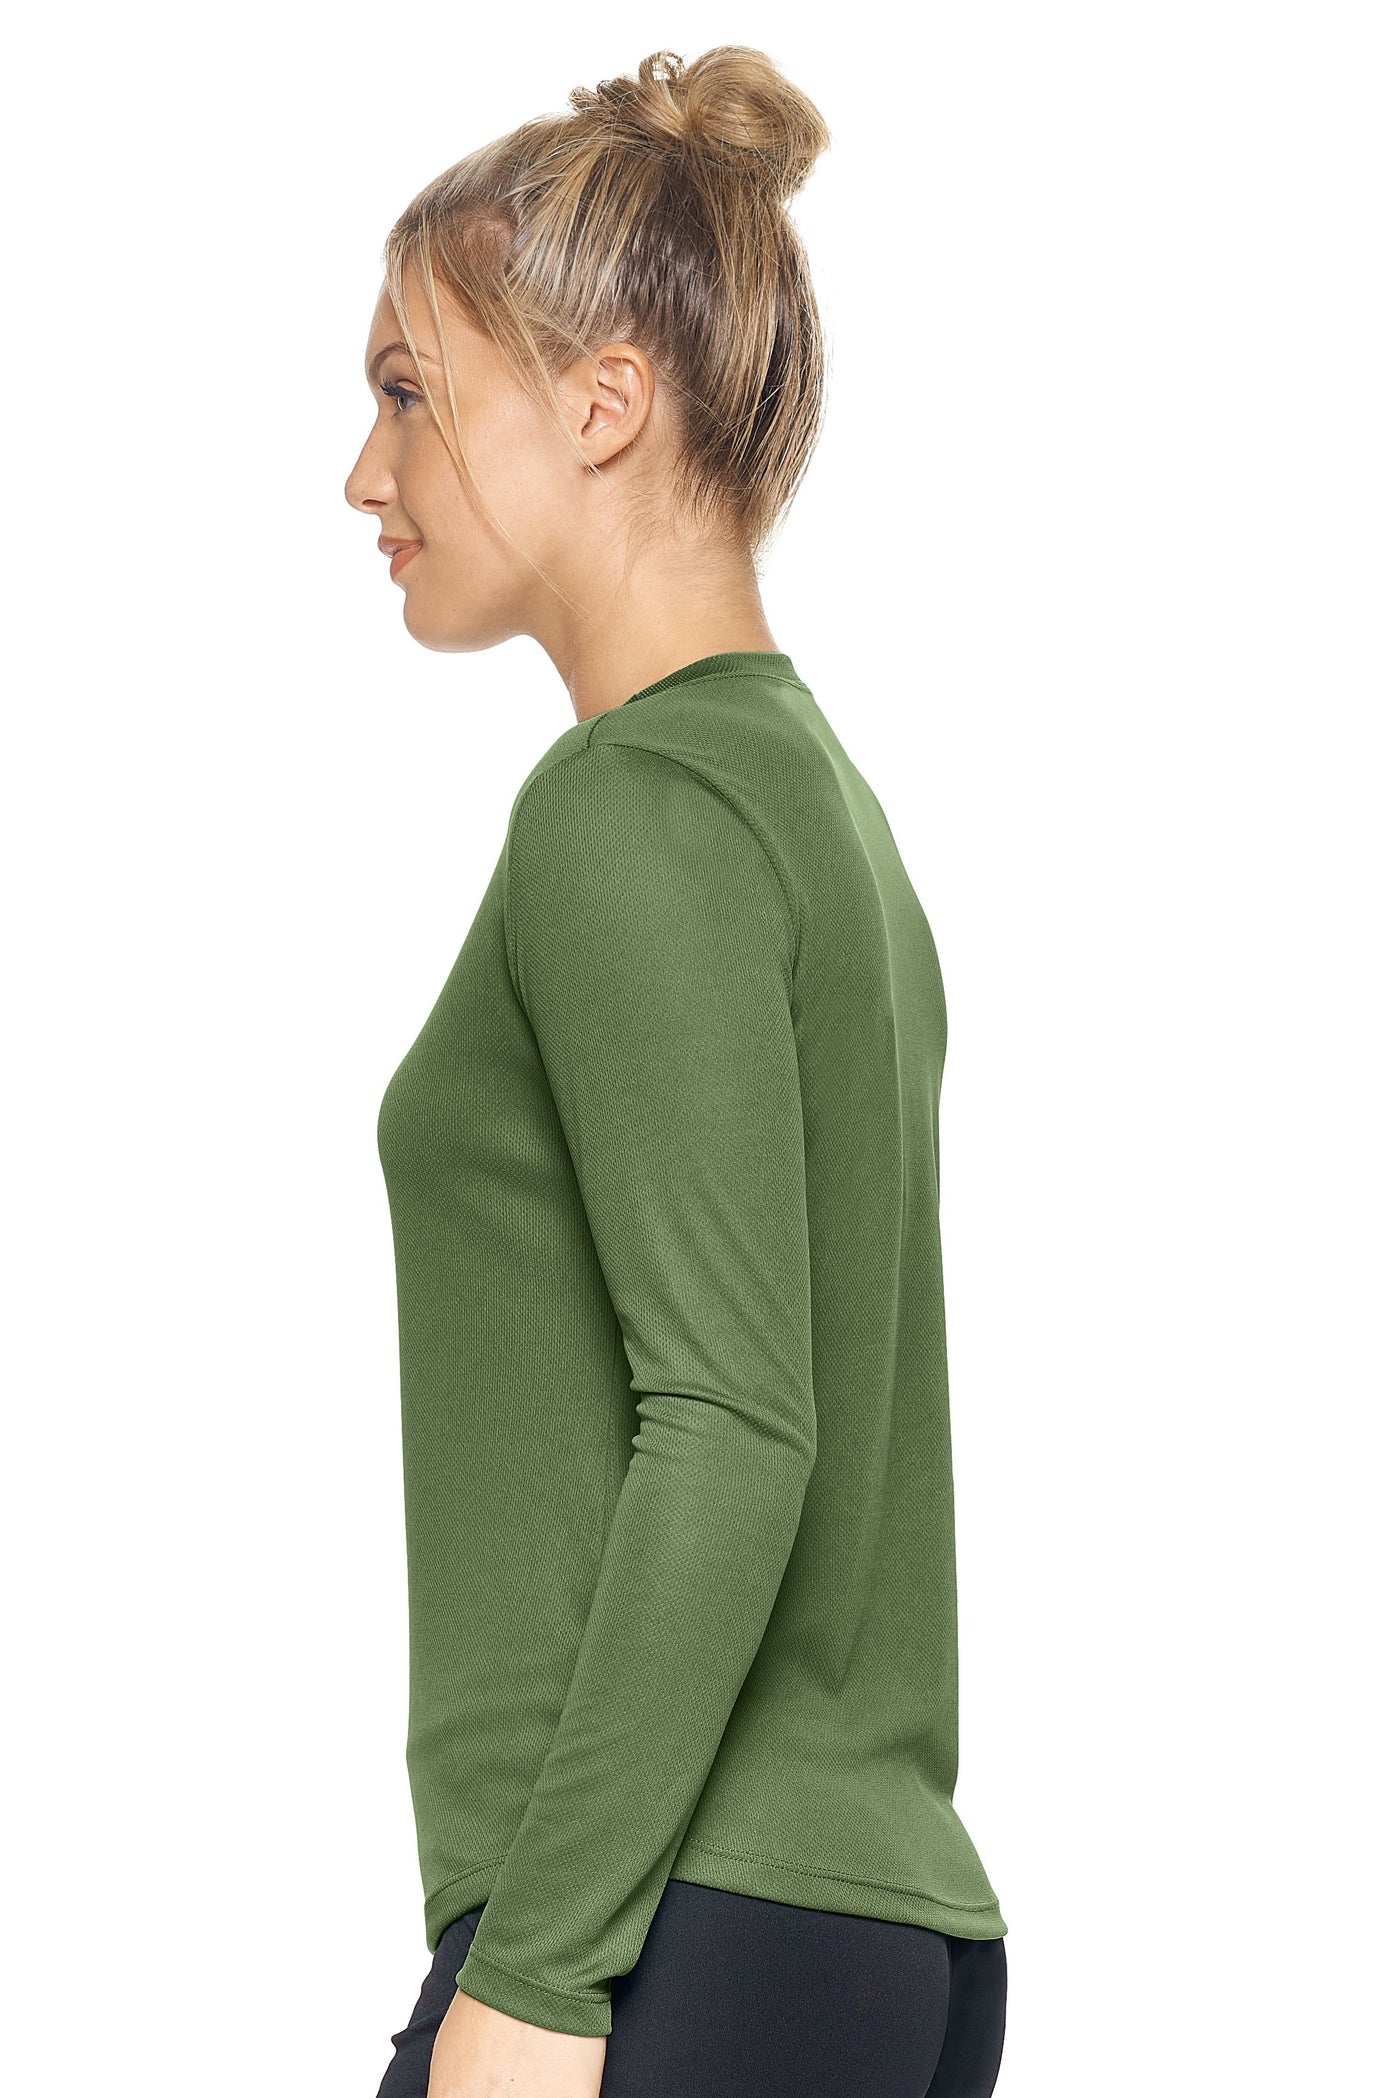 Expert Brand Retail Women's Long Sleeve Crewneck Tec Tee Made in USA Oxymesh military green 2#color_military-green